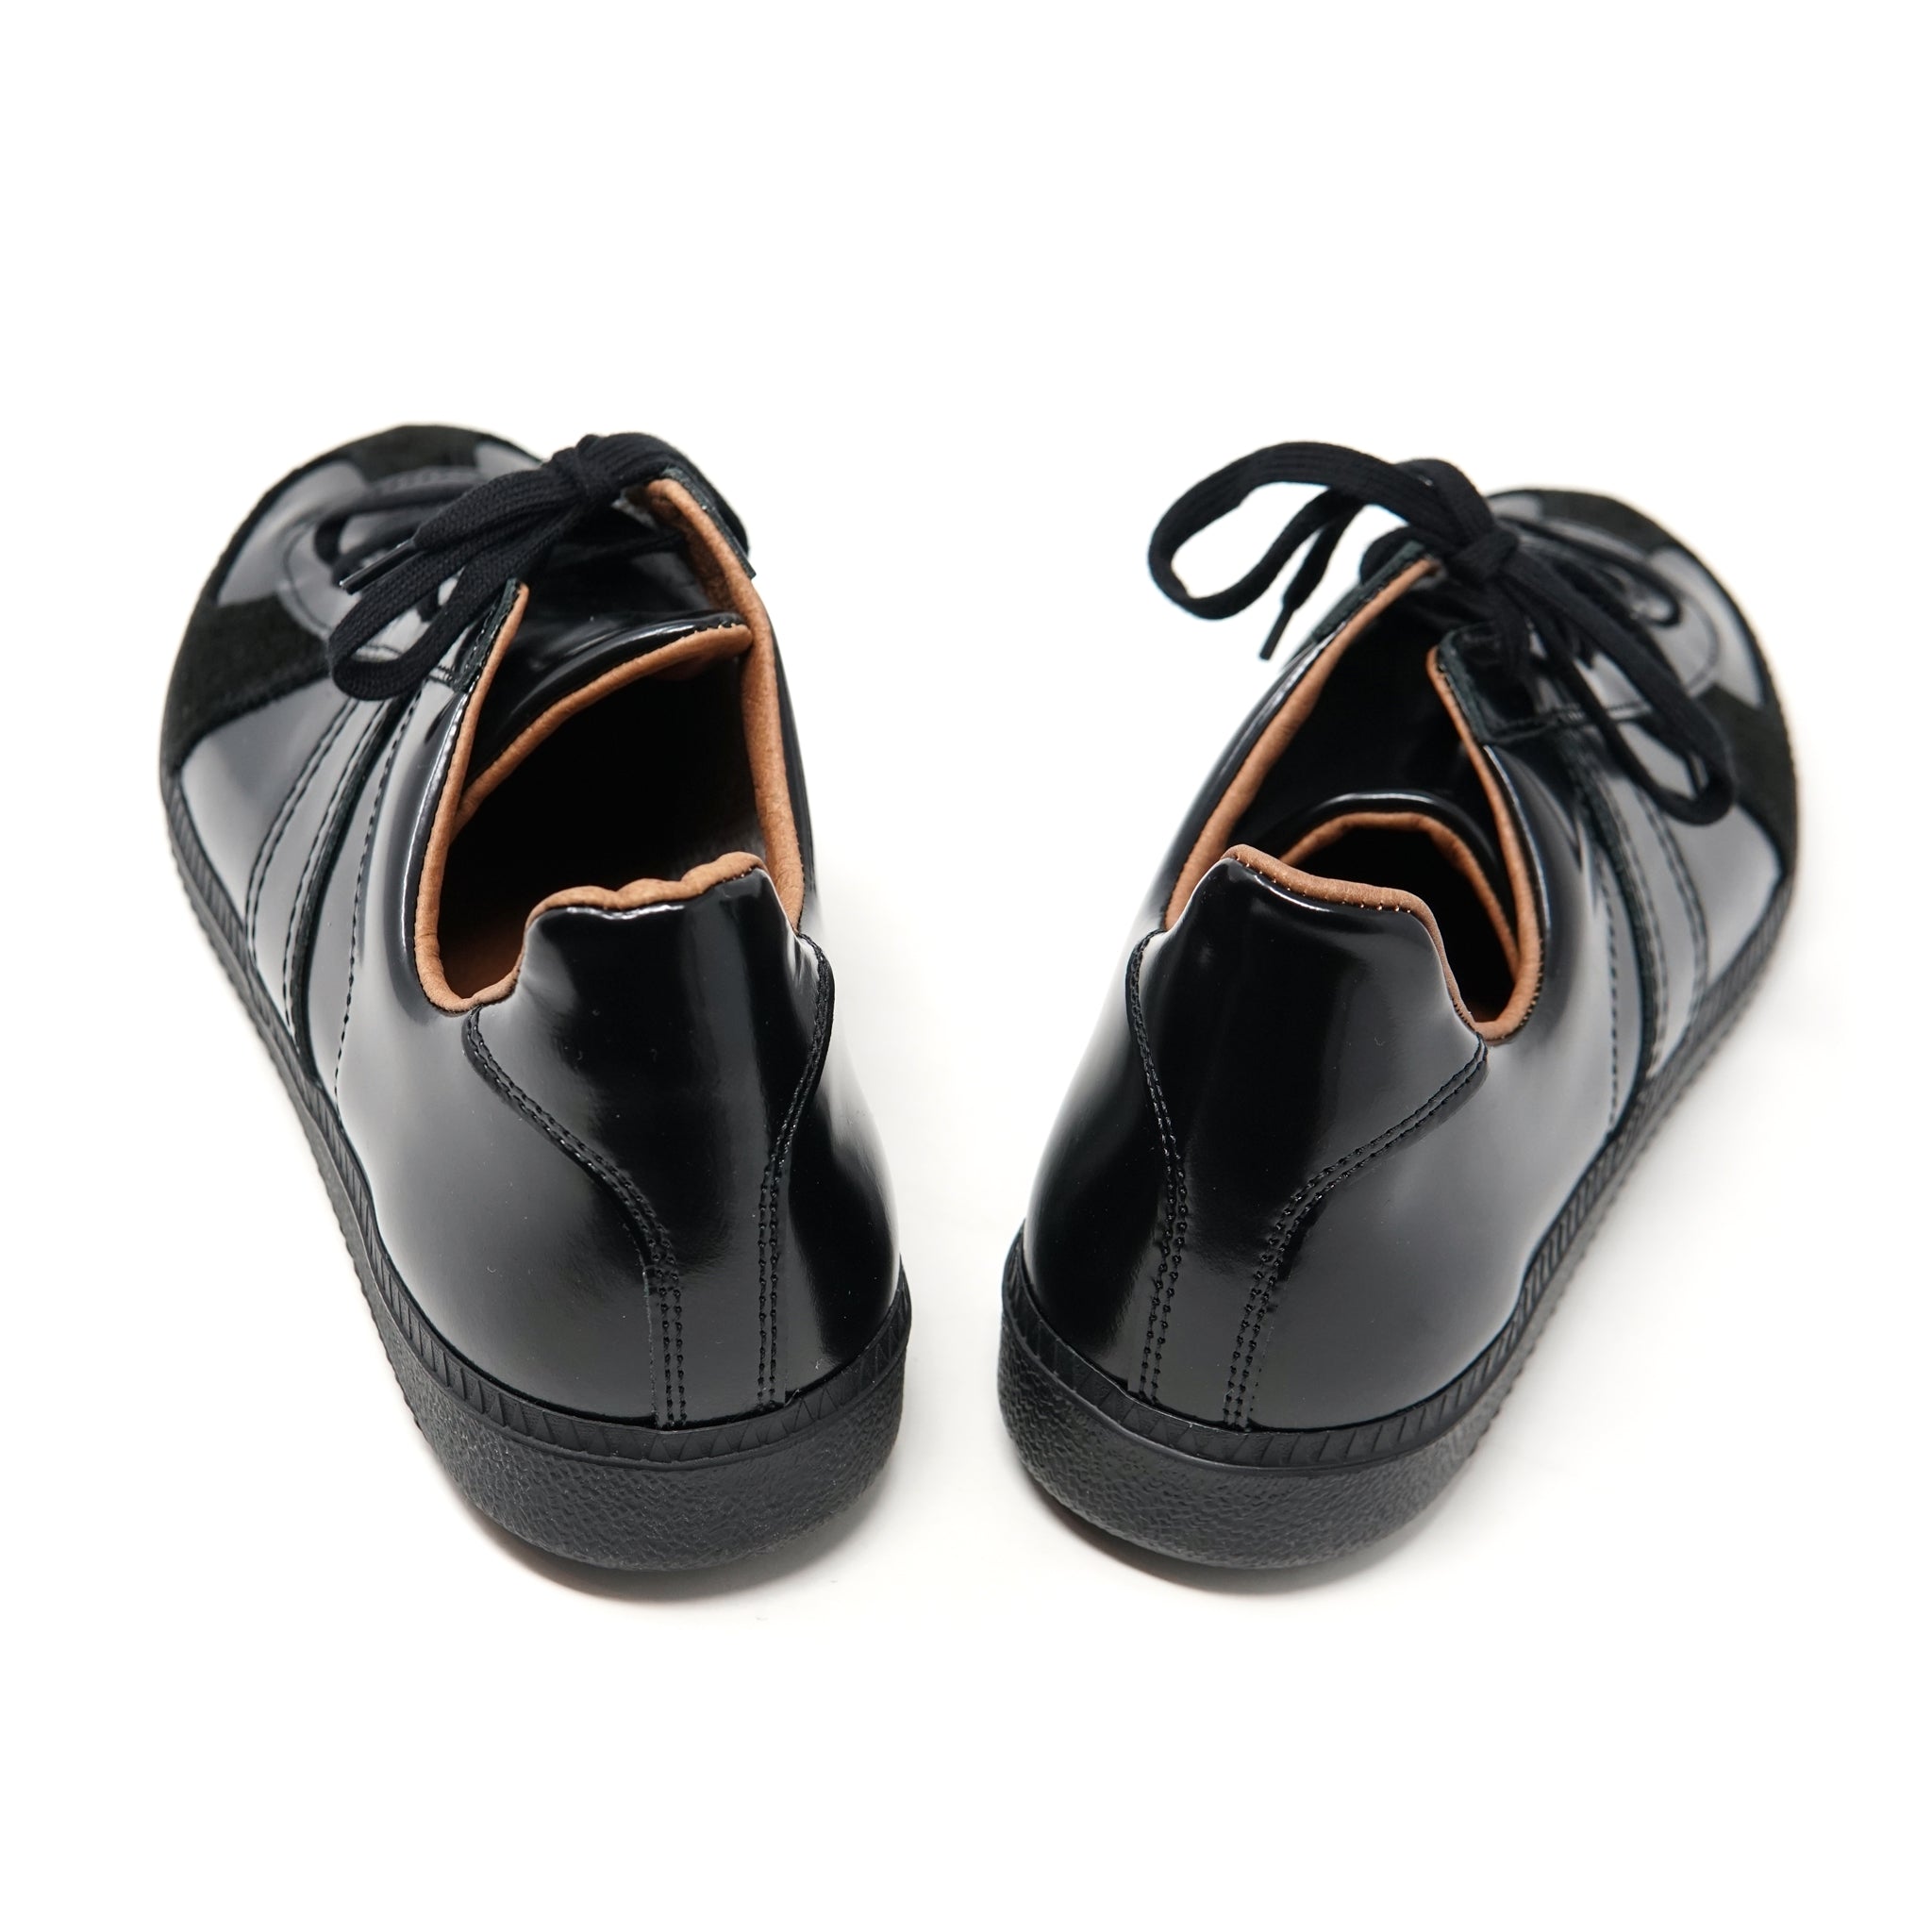 No:1700lux | Name:GERMAN MILITARY TRAINER  | Color:Black【REPRODUCTION OF FOUND_リプロダクションオブファウンド】